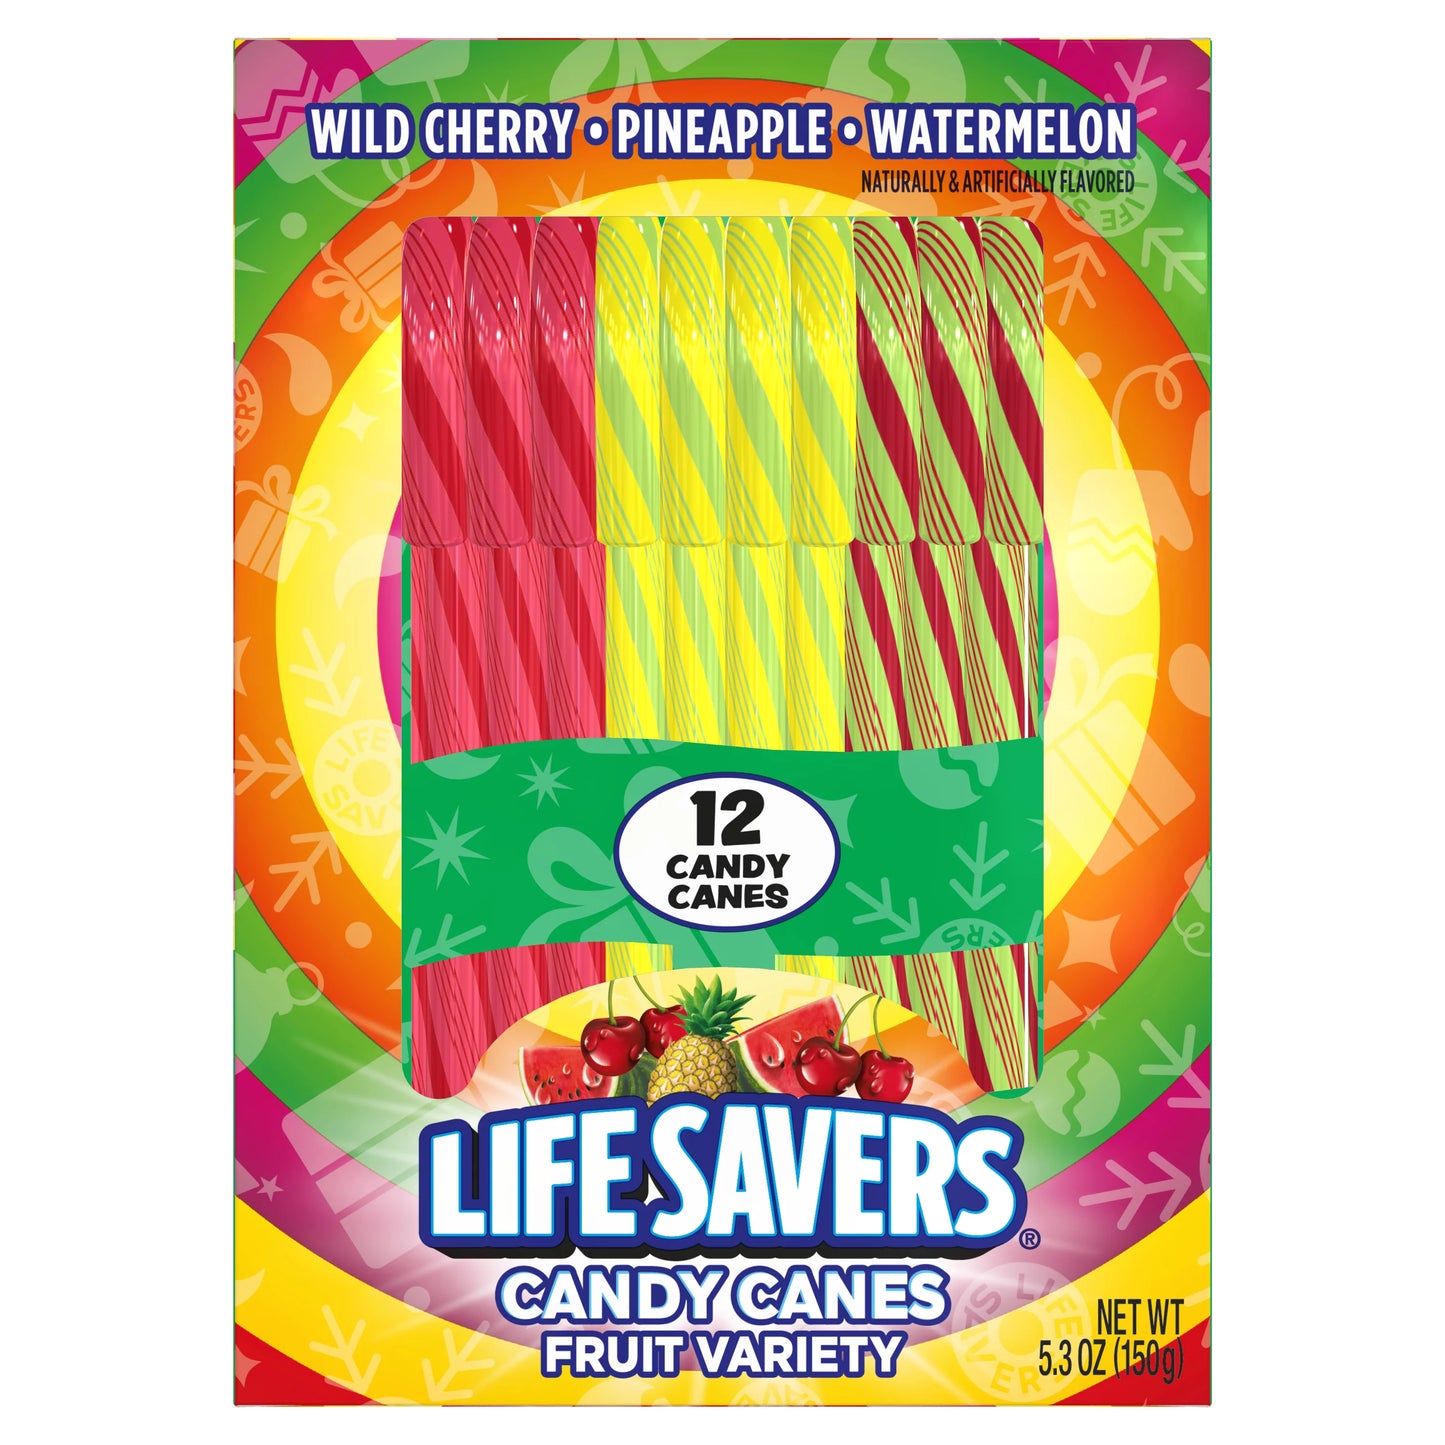 LIFE SAVERS Fruit Variety Candy Canes, 12 Count Cradle